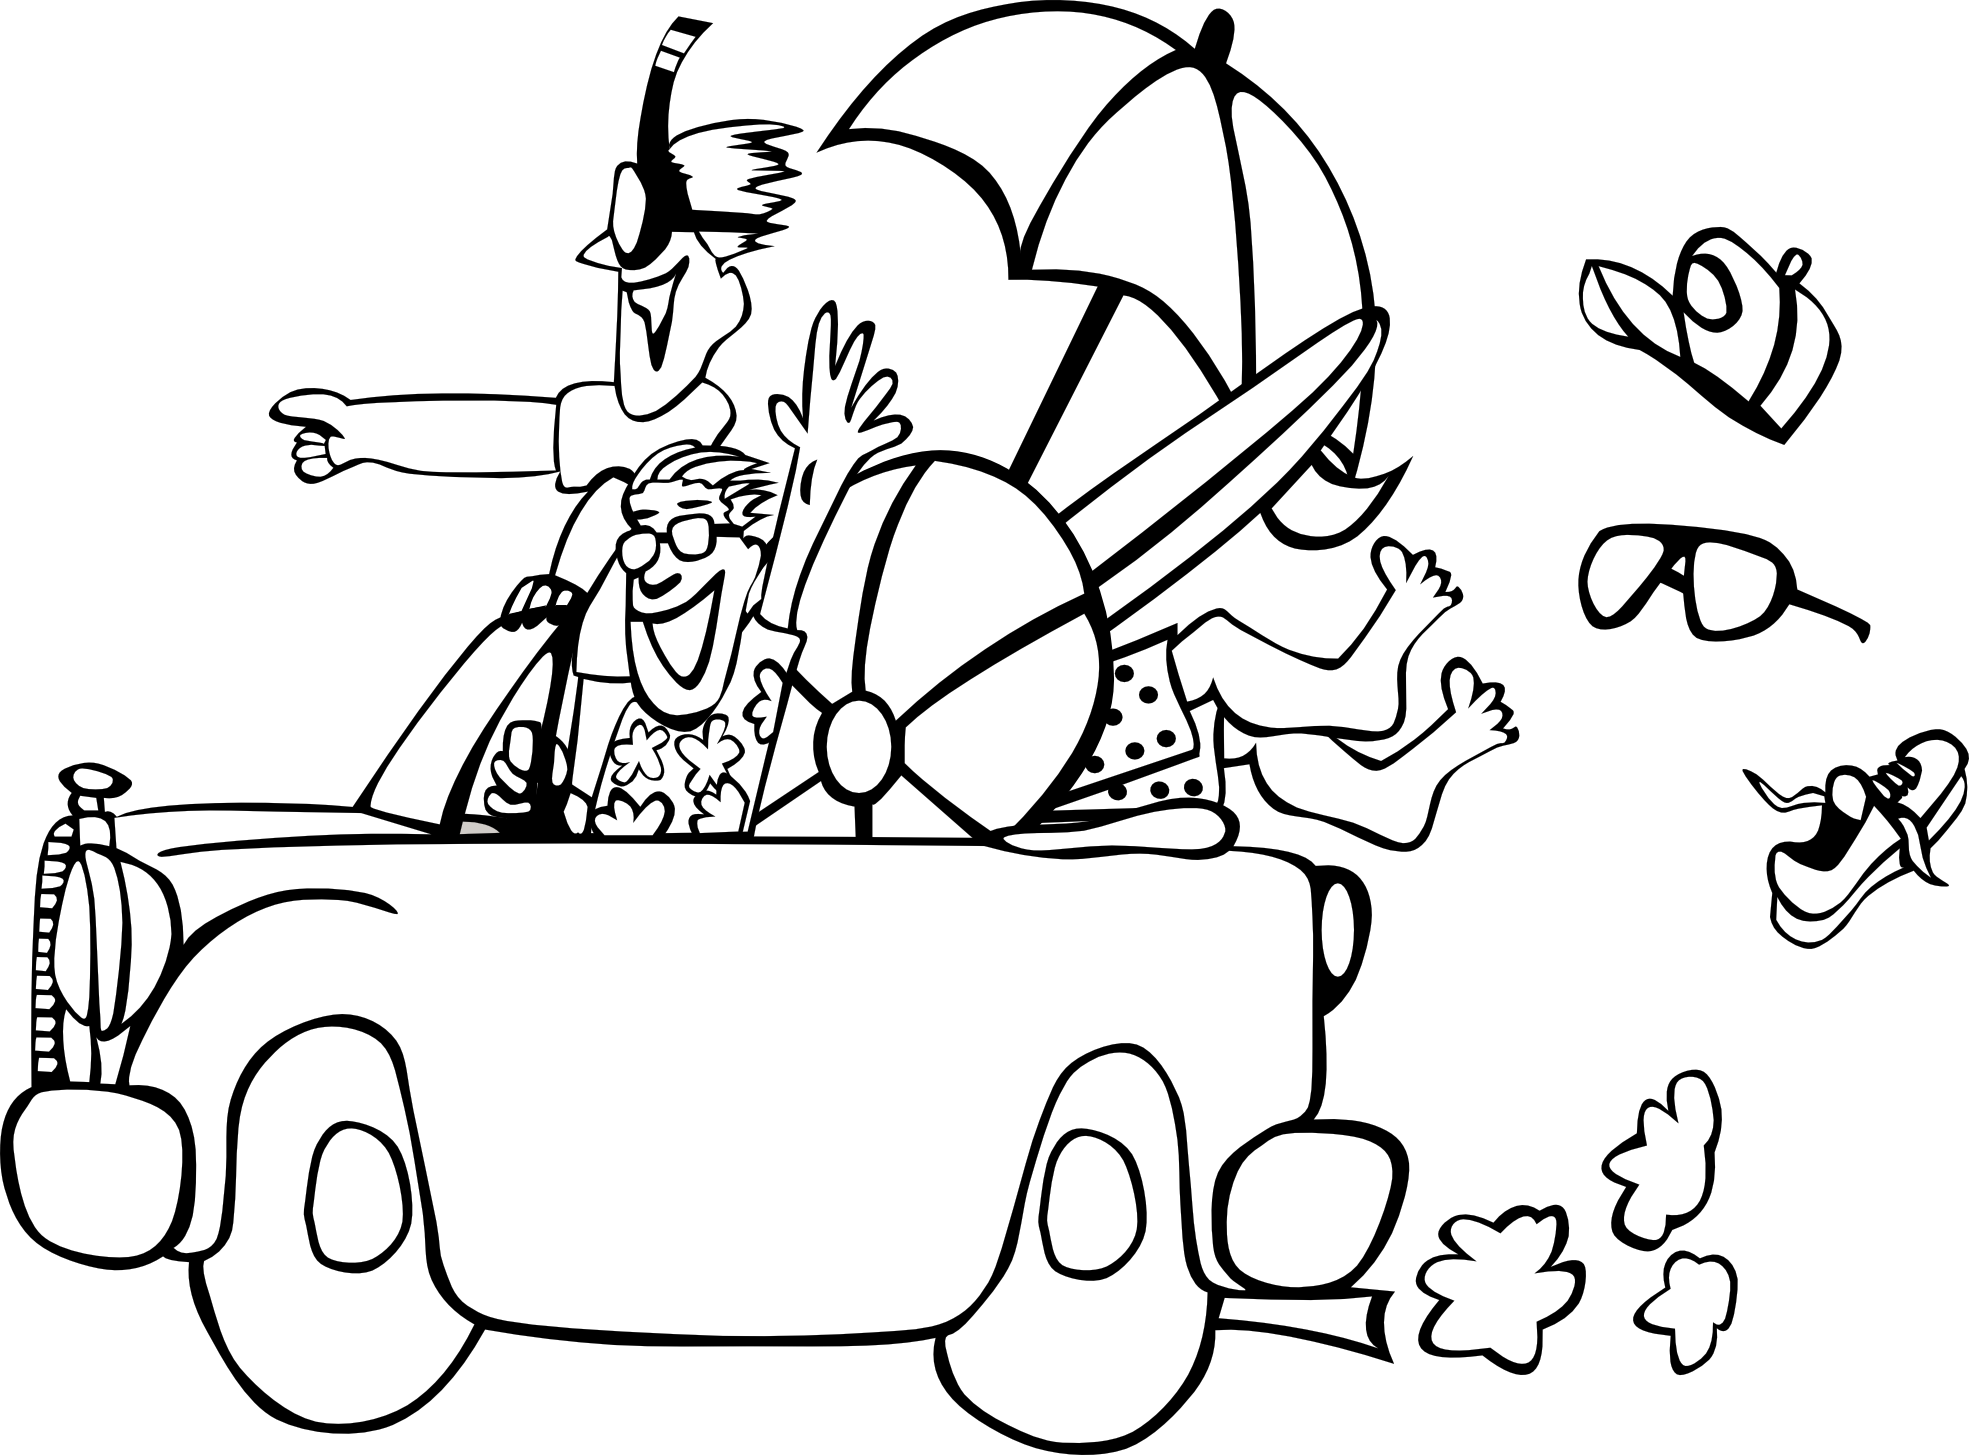 Summer vacation panda free. June clipart black and white